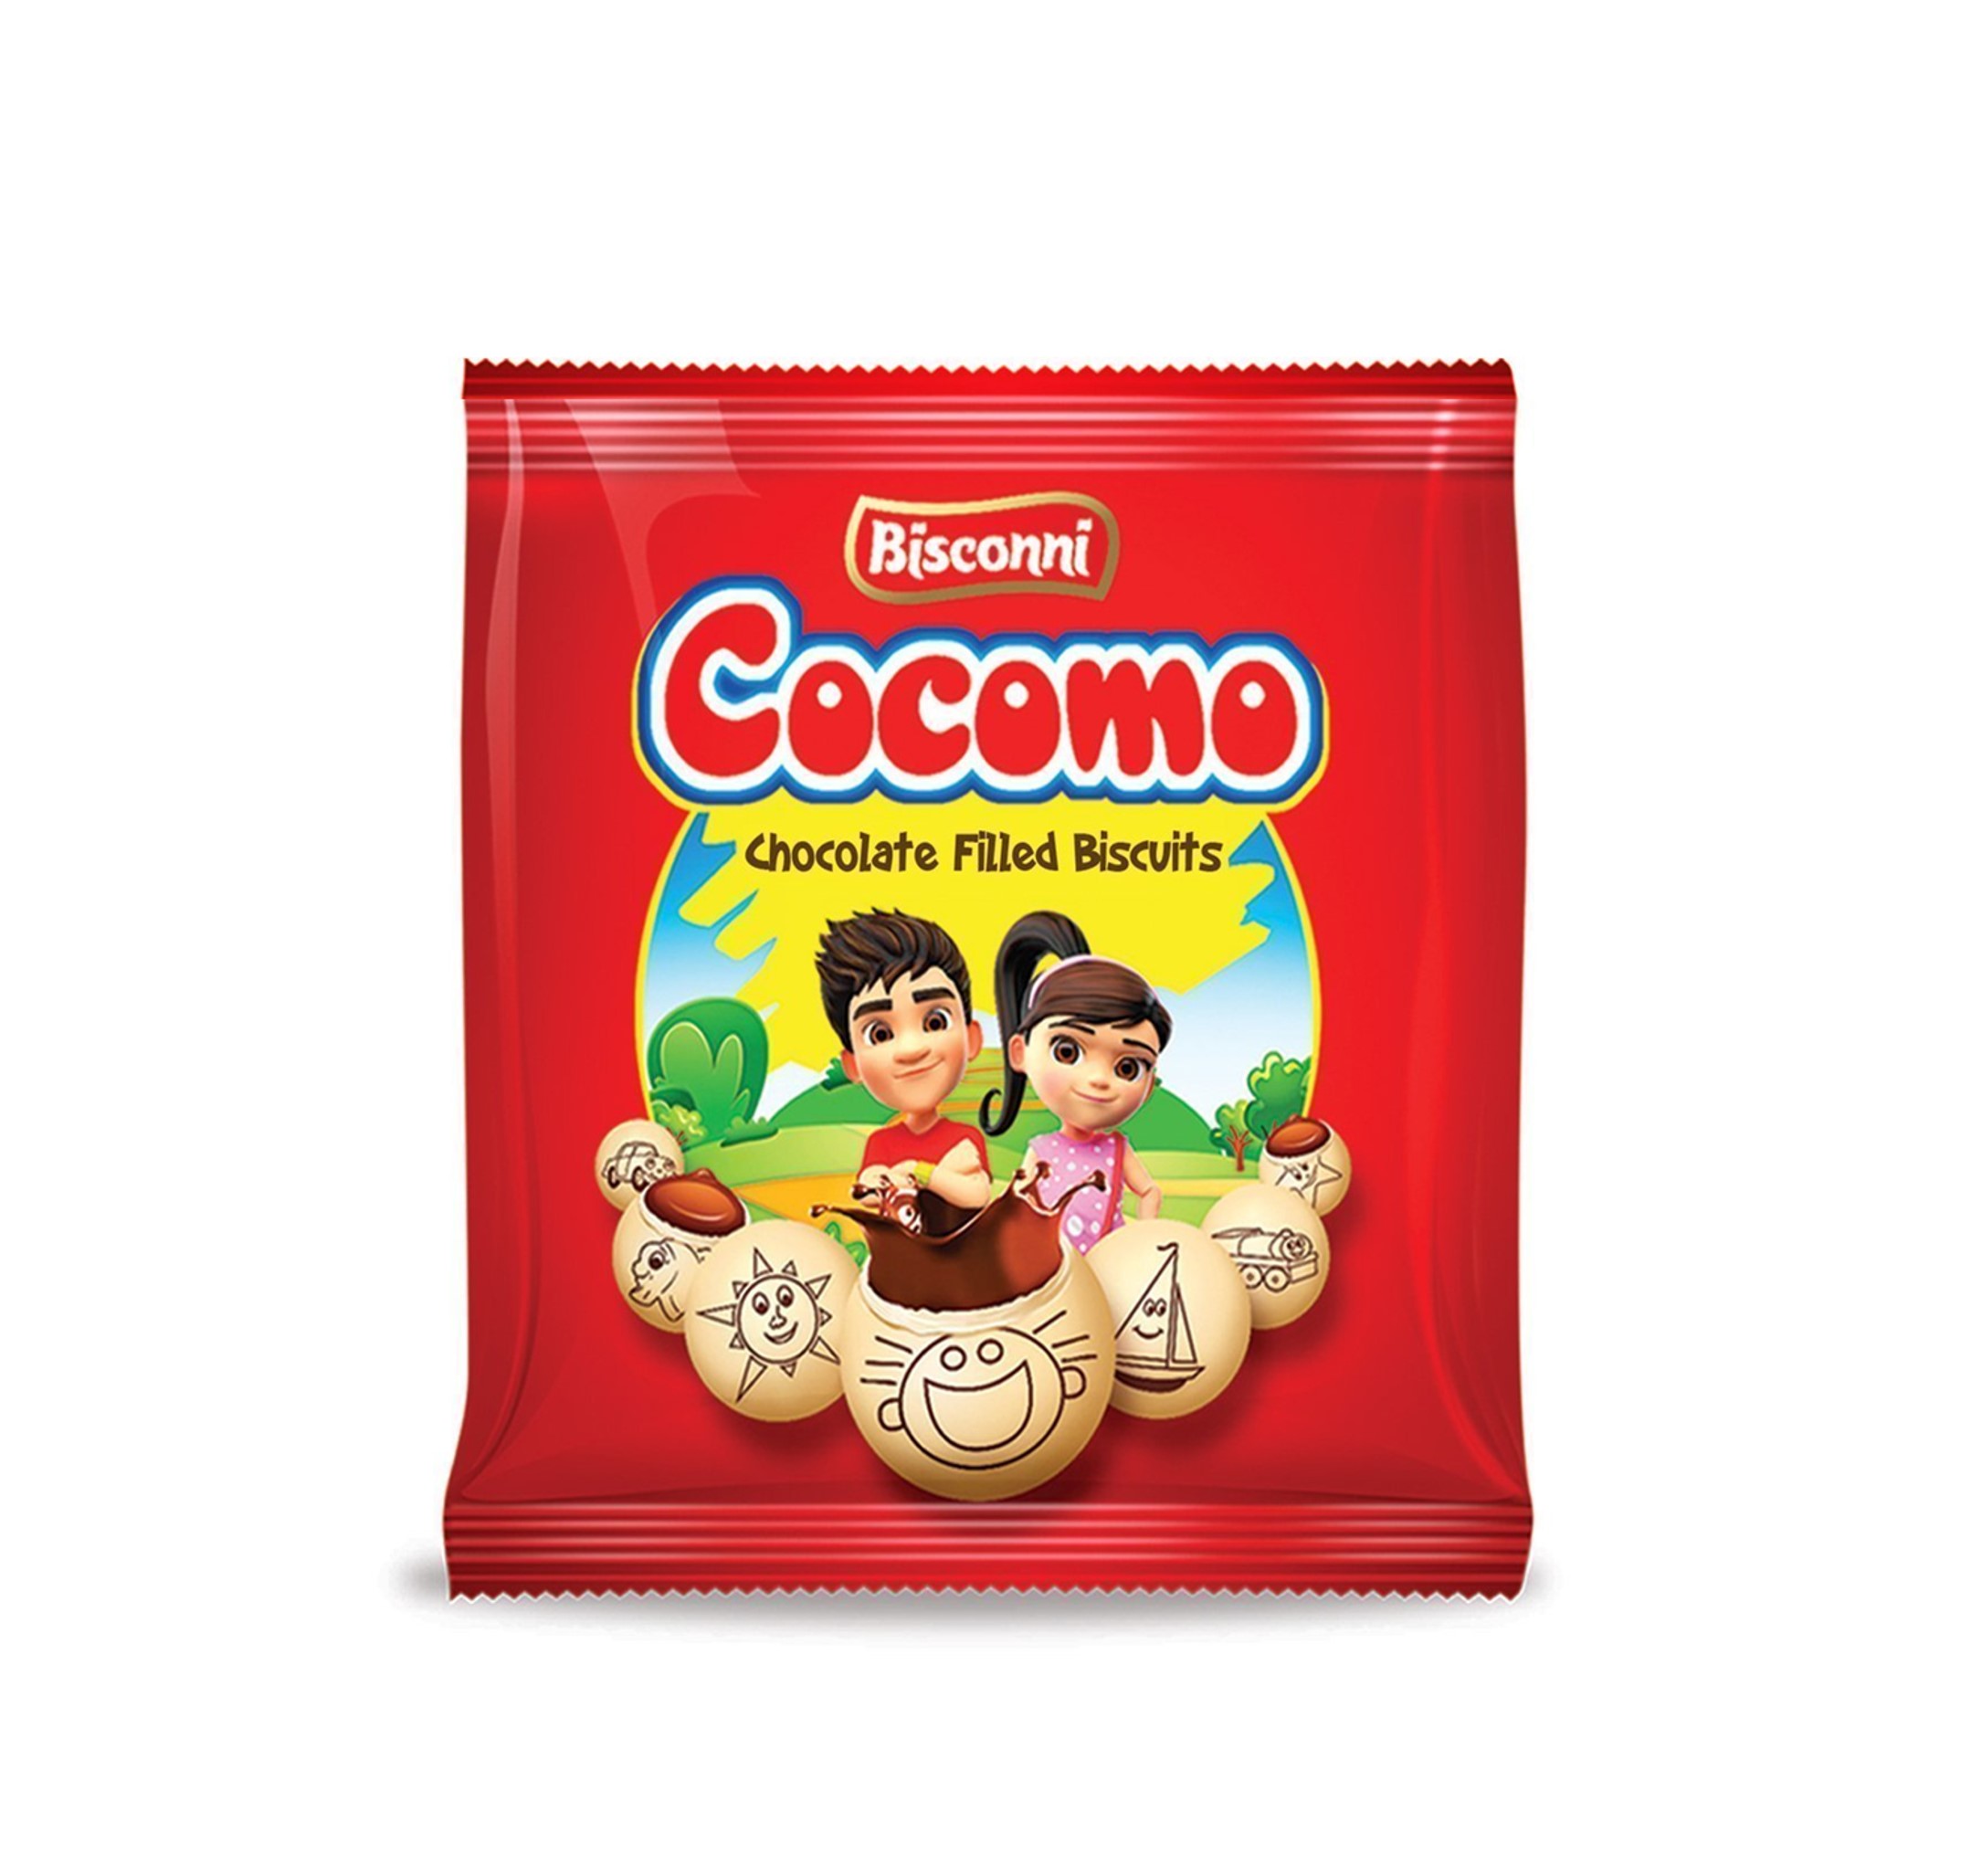 COCOMO CHOCOLATE BISCUITS  